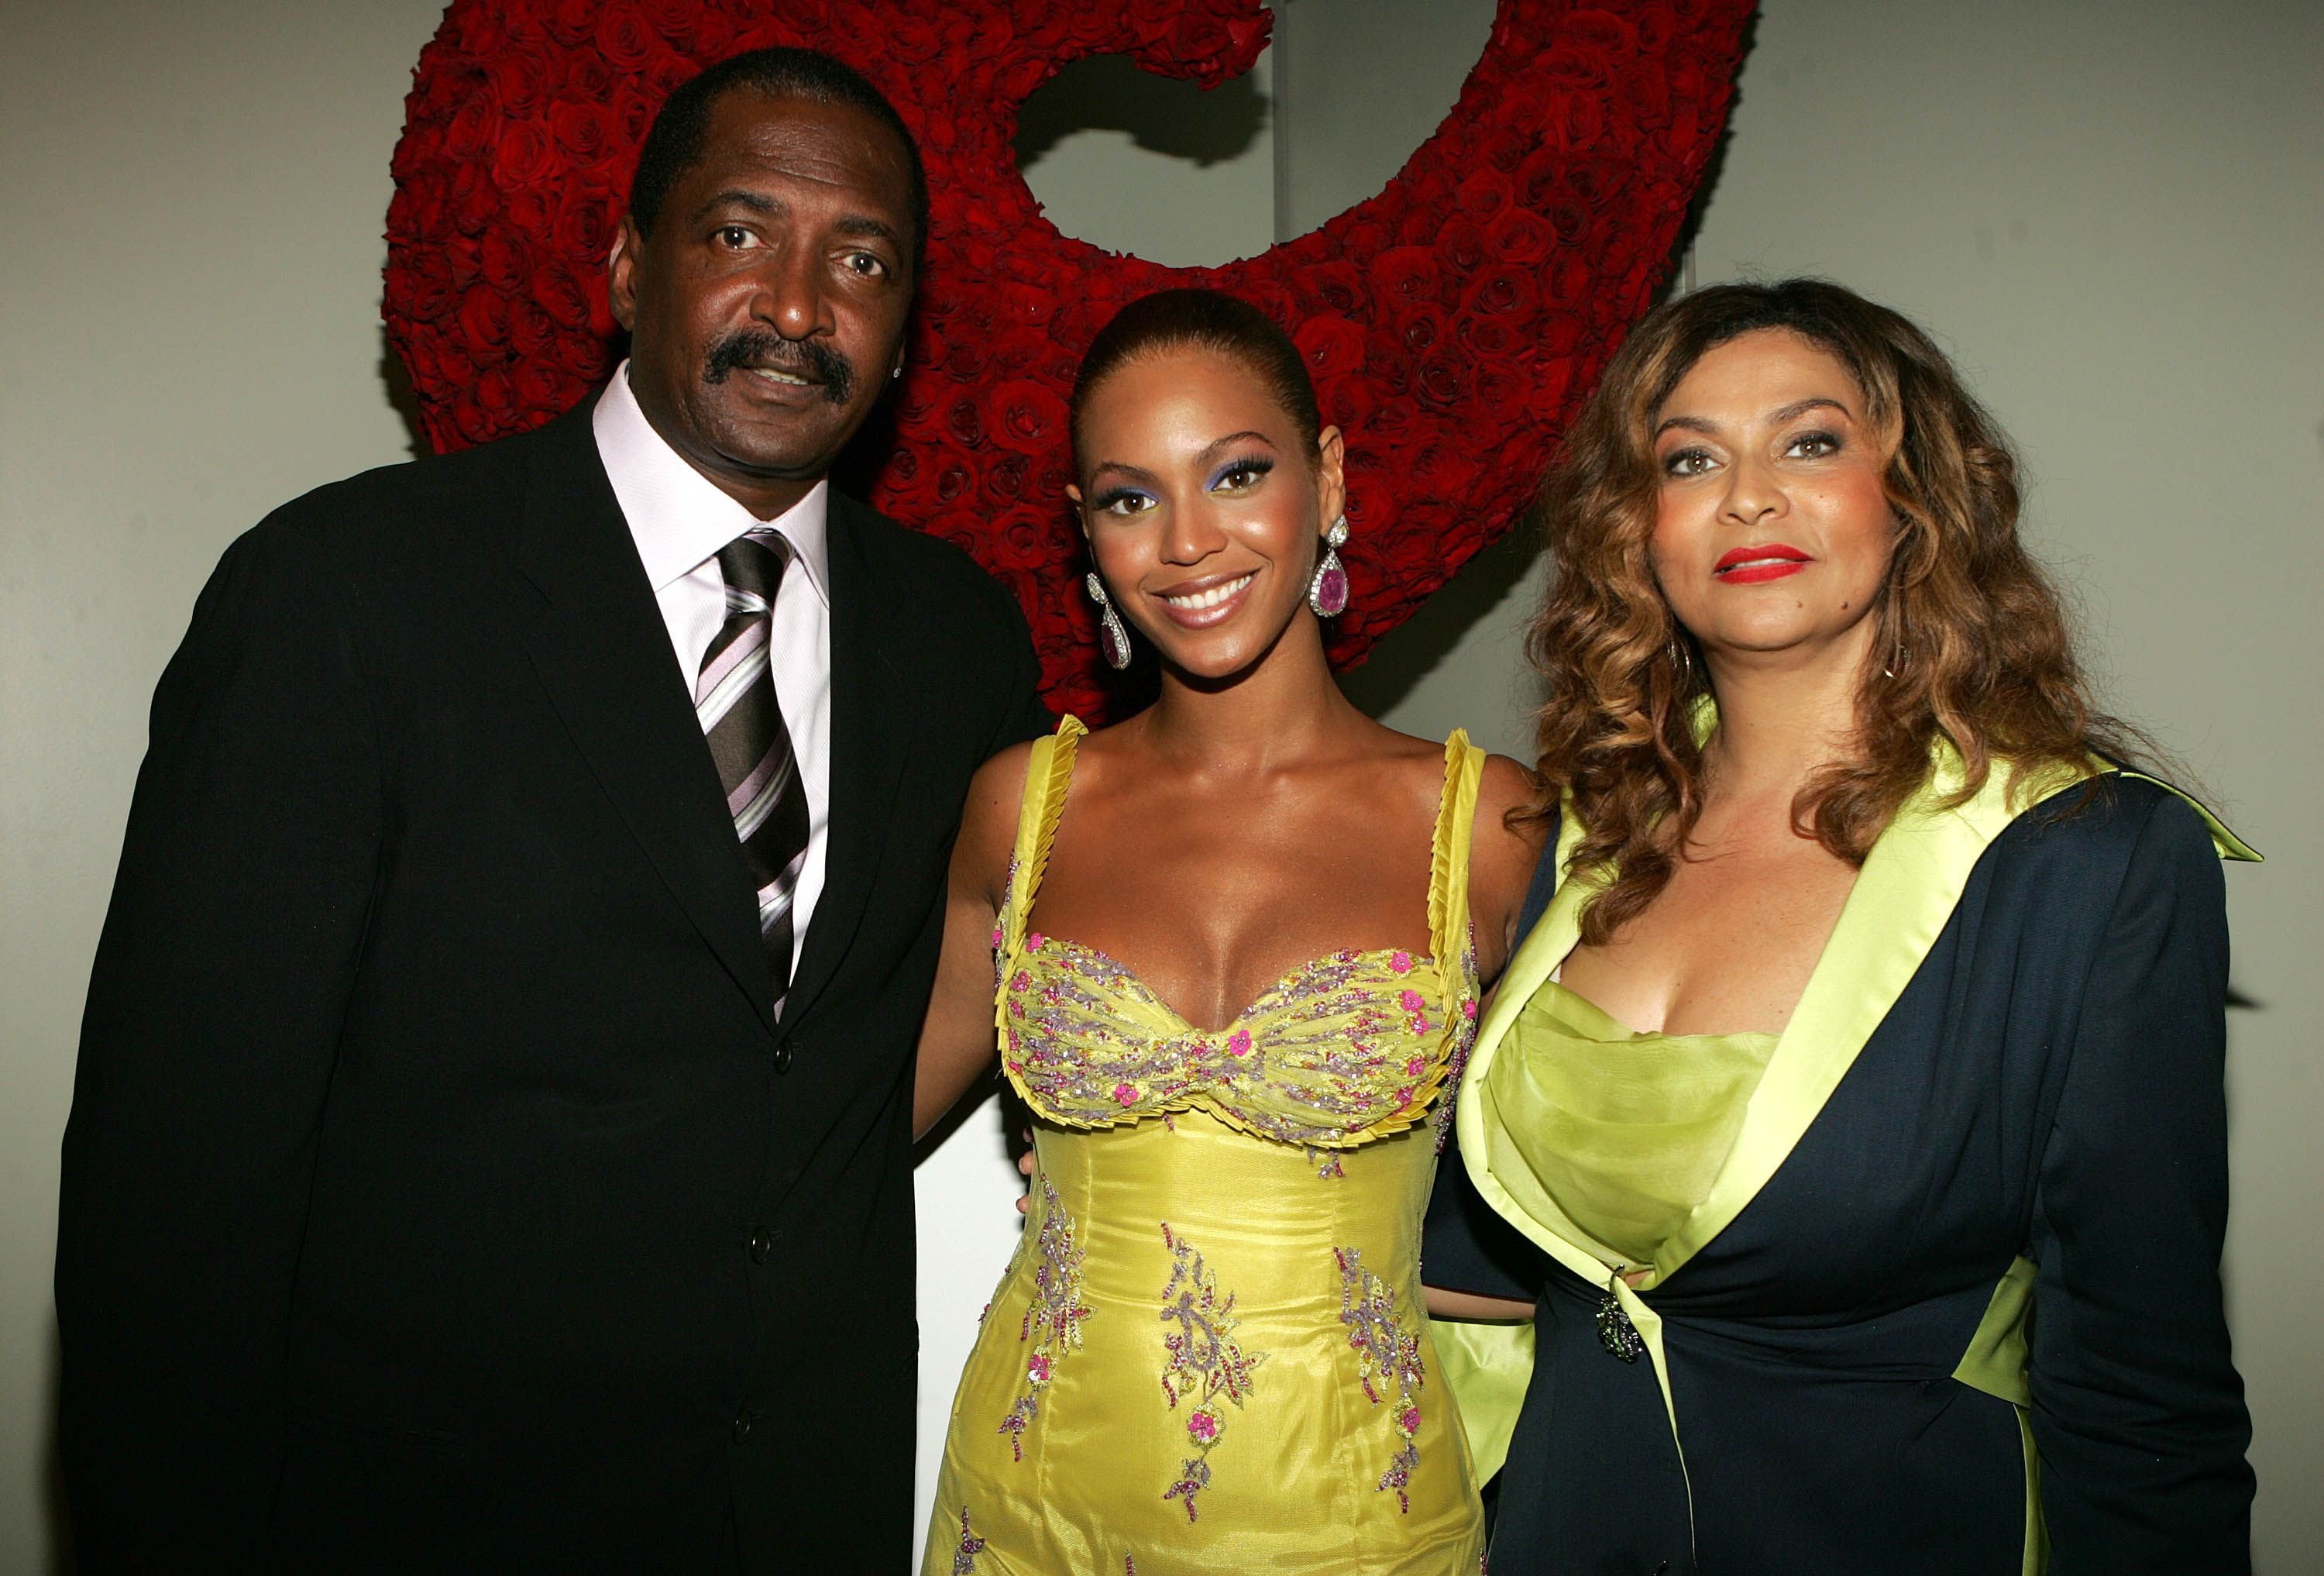  Beyonce Knowles, Matthew Knowles and Tina Knowles during the "Beyonce: Beyond the Red Carpet" auction on June 23, 2005, in New York City. | Source: Getty Images